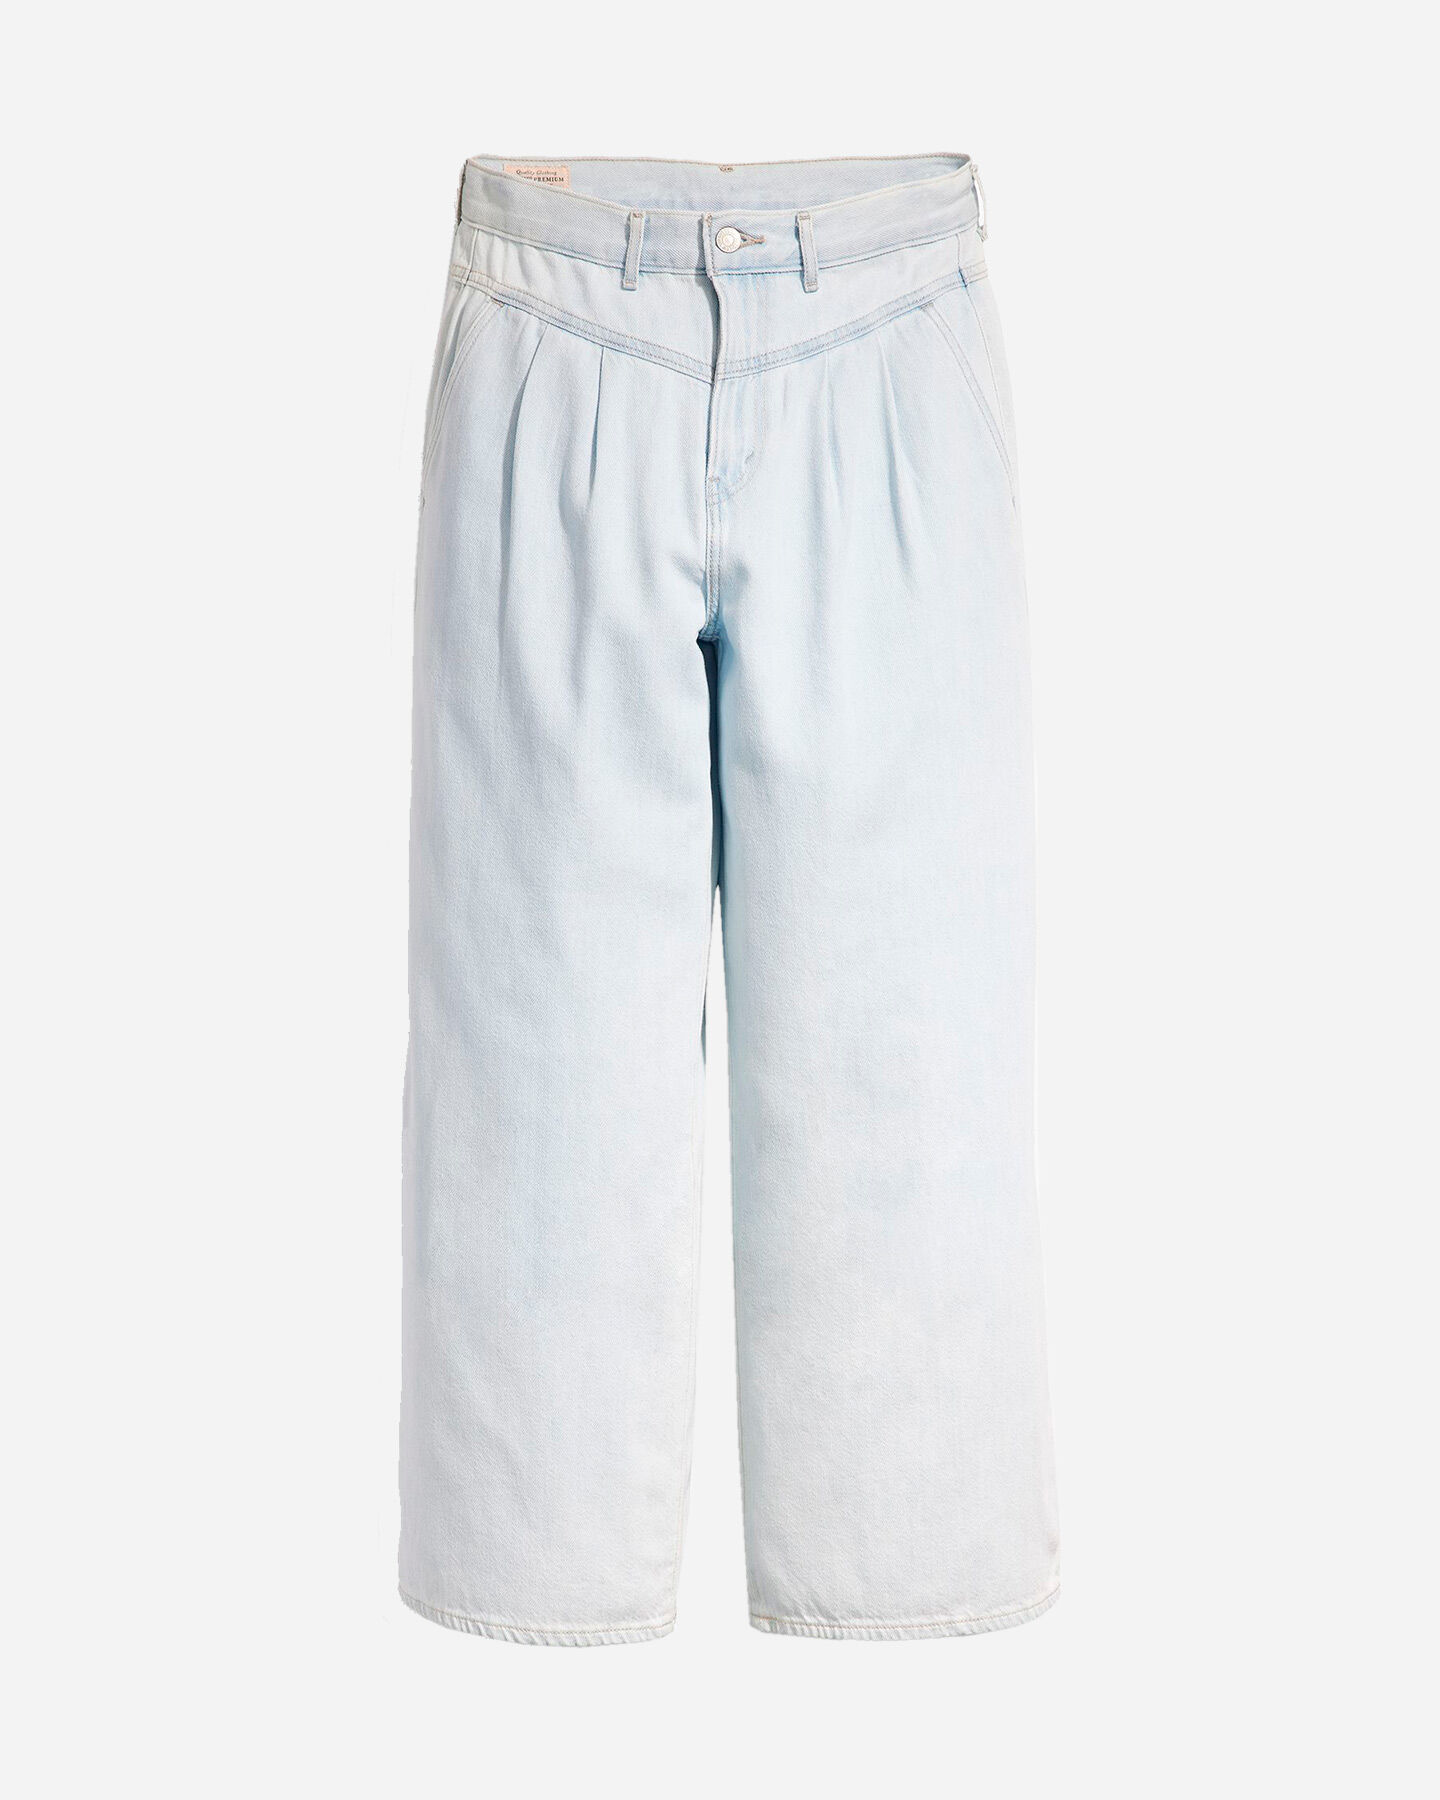  Pantalone LEVI'S FEATHERWEIGHT BAGGY L28 W S4132817|0008|25 scatto 0